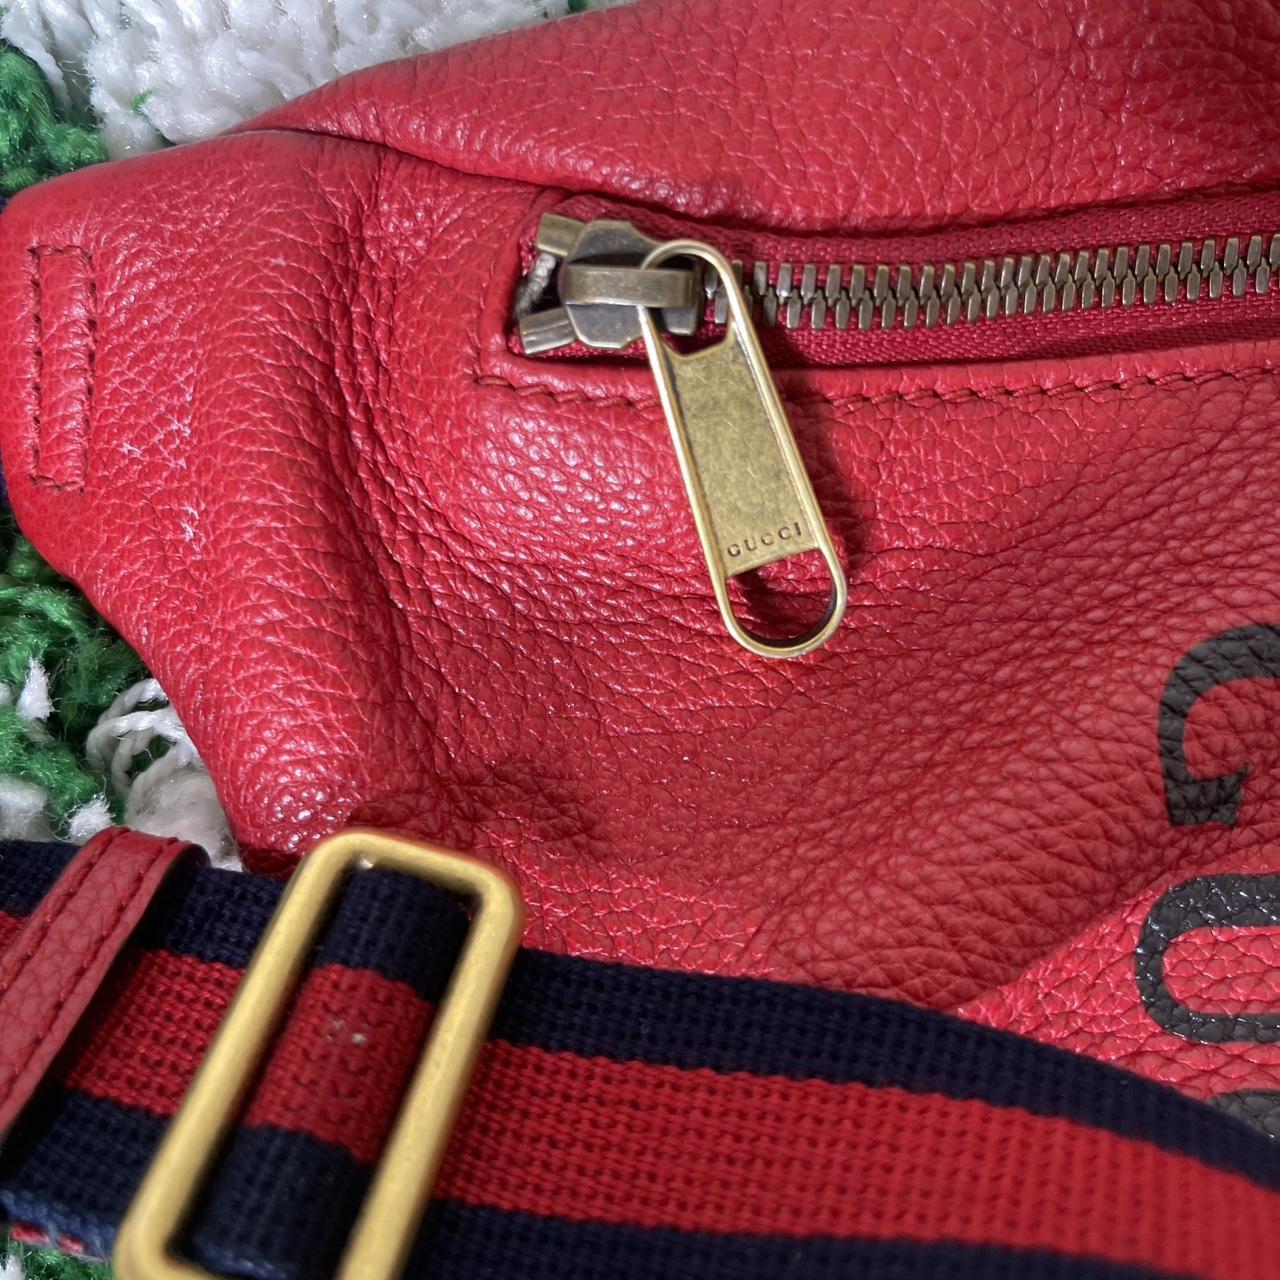 Gucci Tomorrow Belt Bag in Red for Men